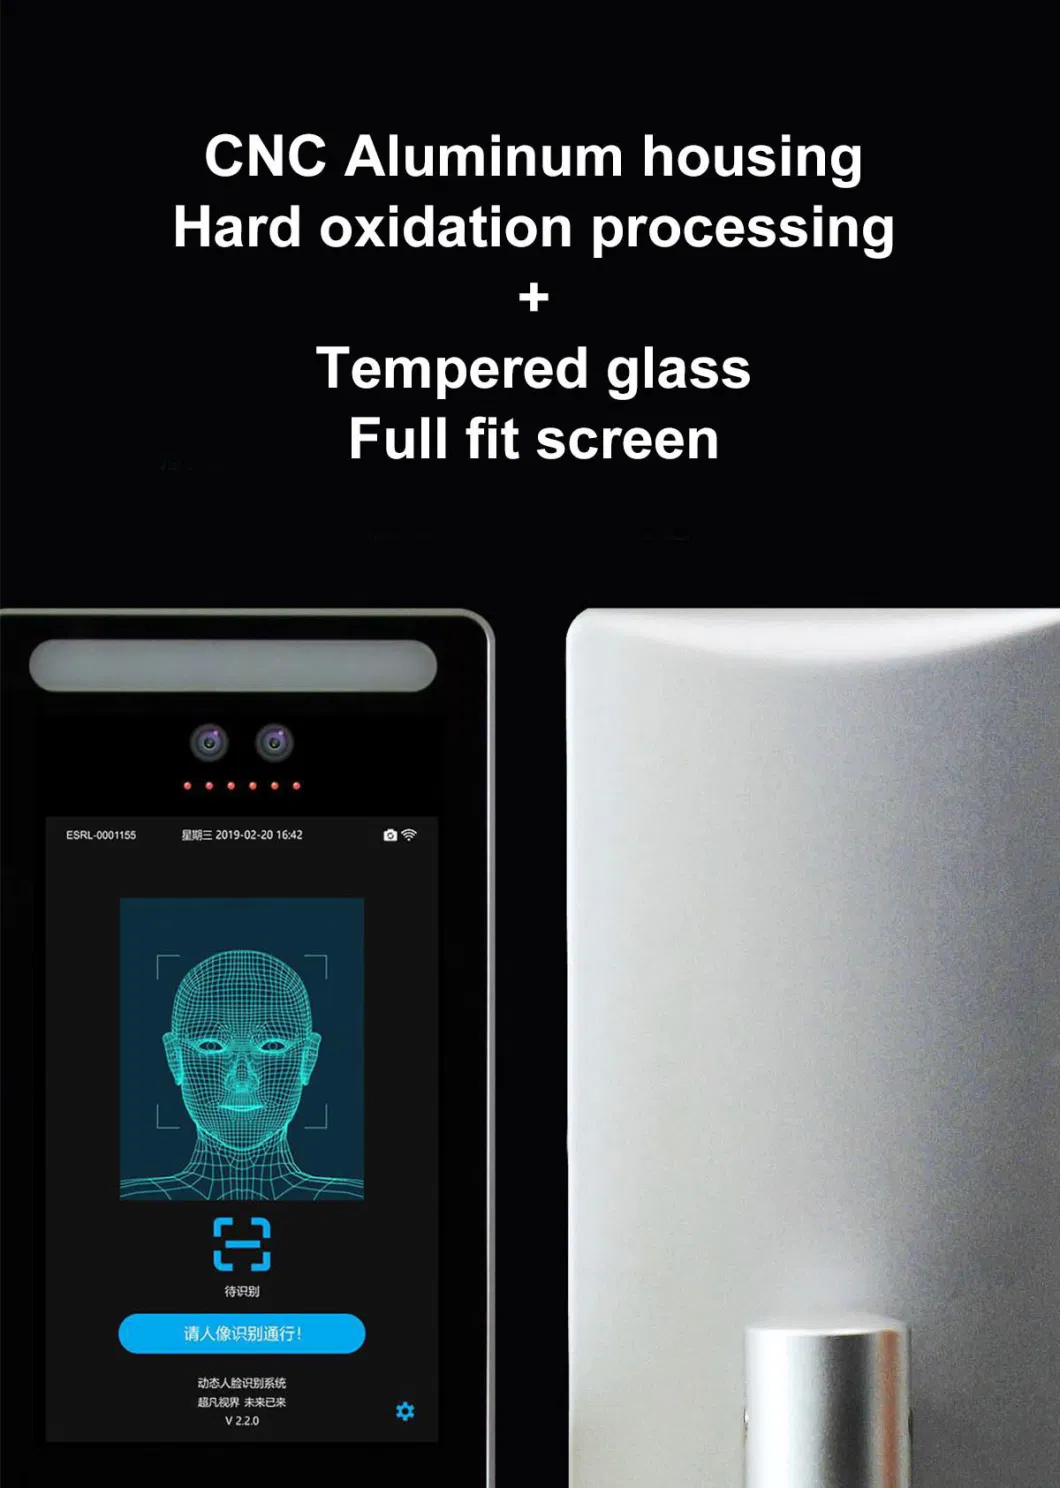 Automatic Infrared Human Body Face Recognition Temperature Measurement System